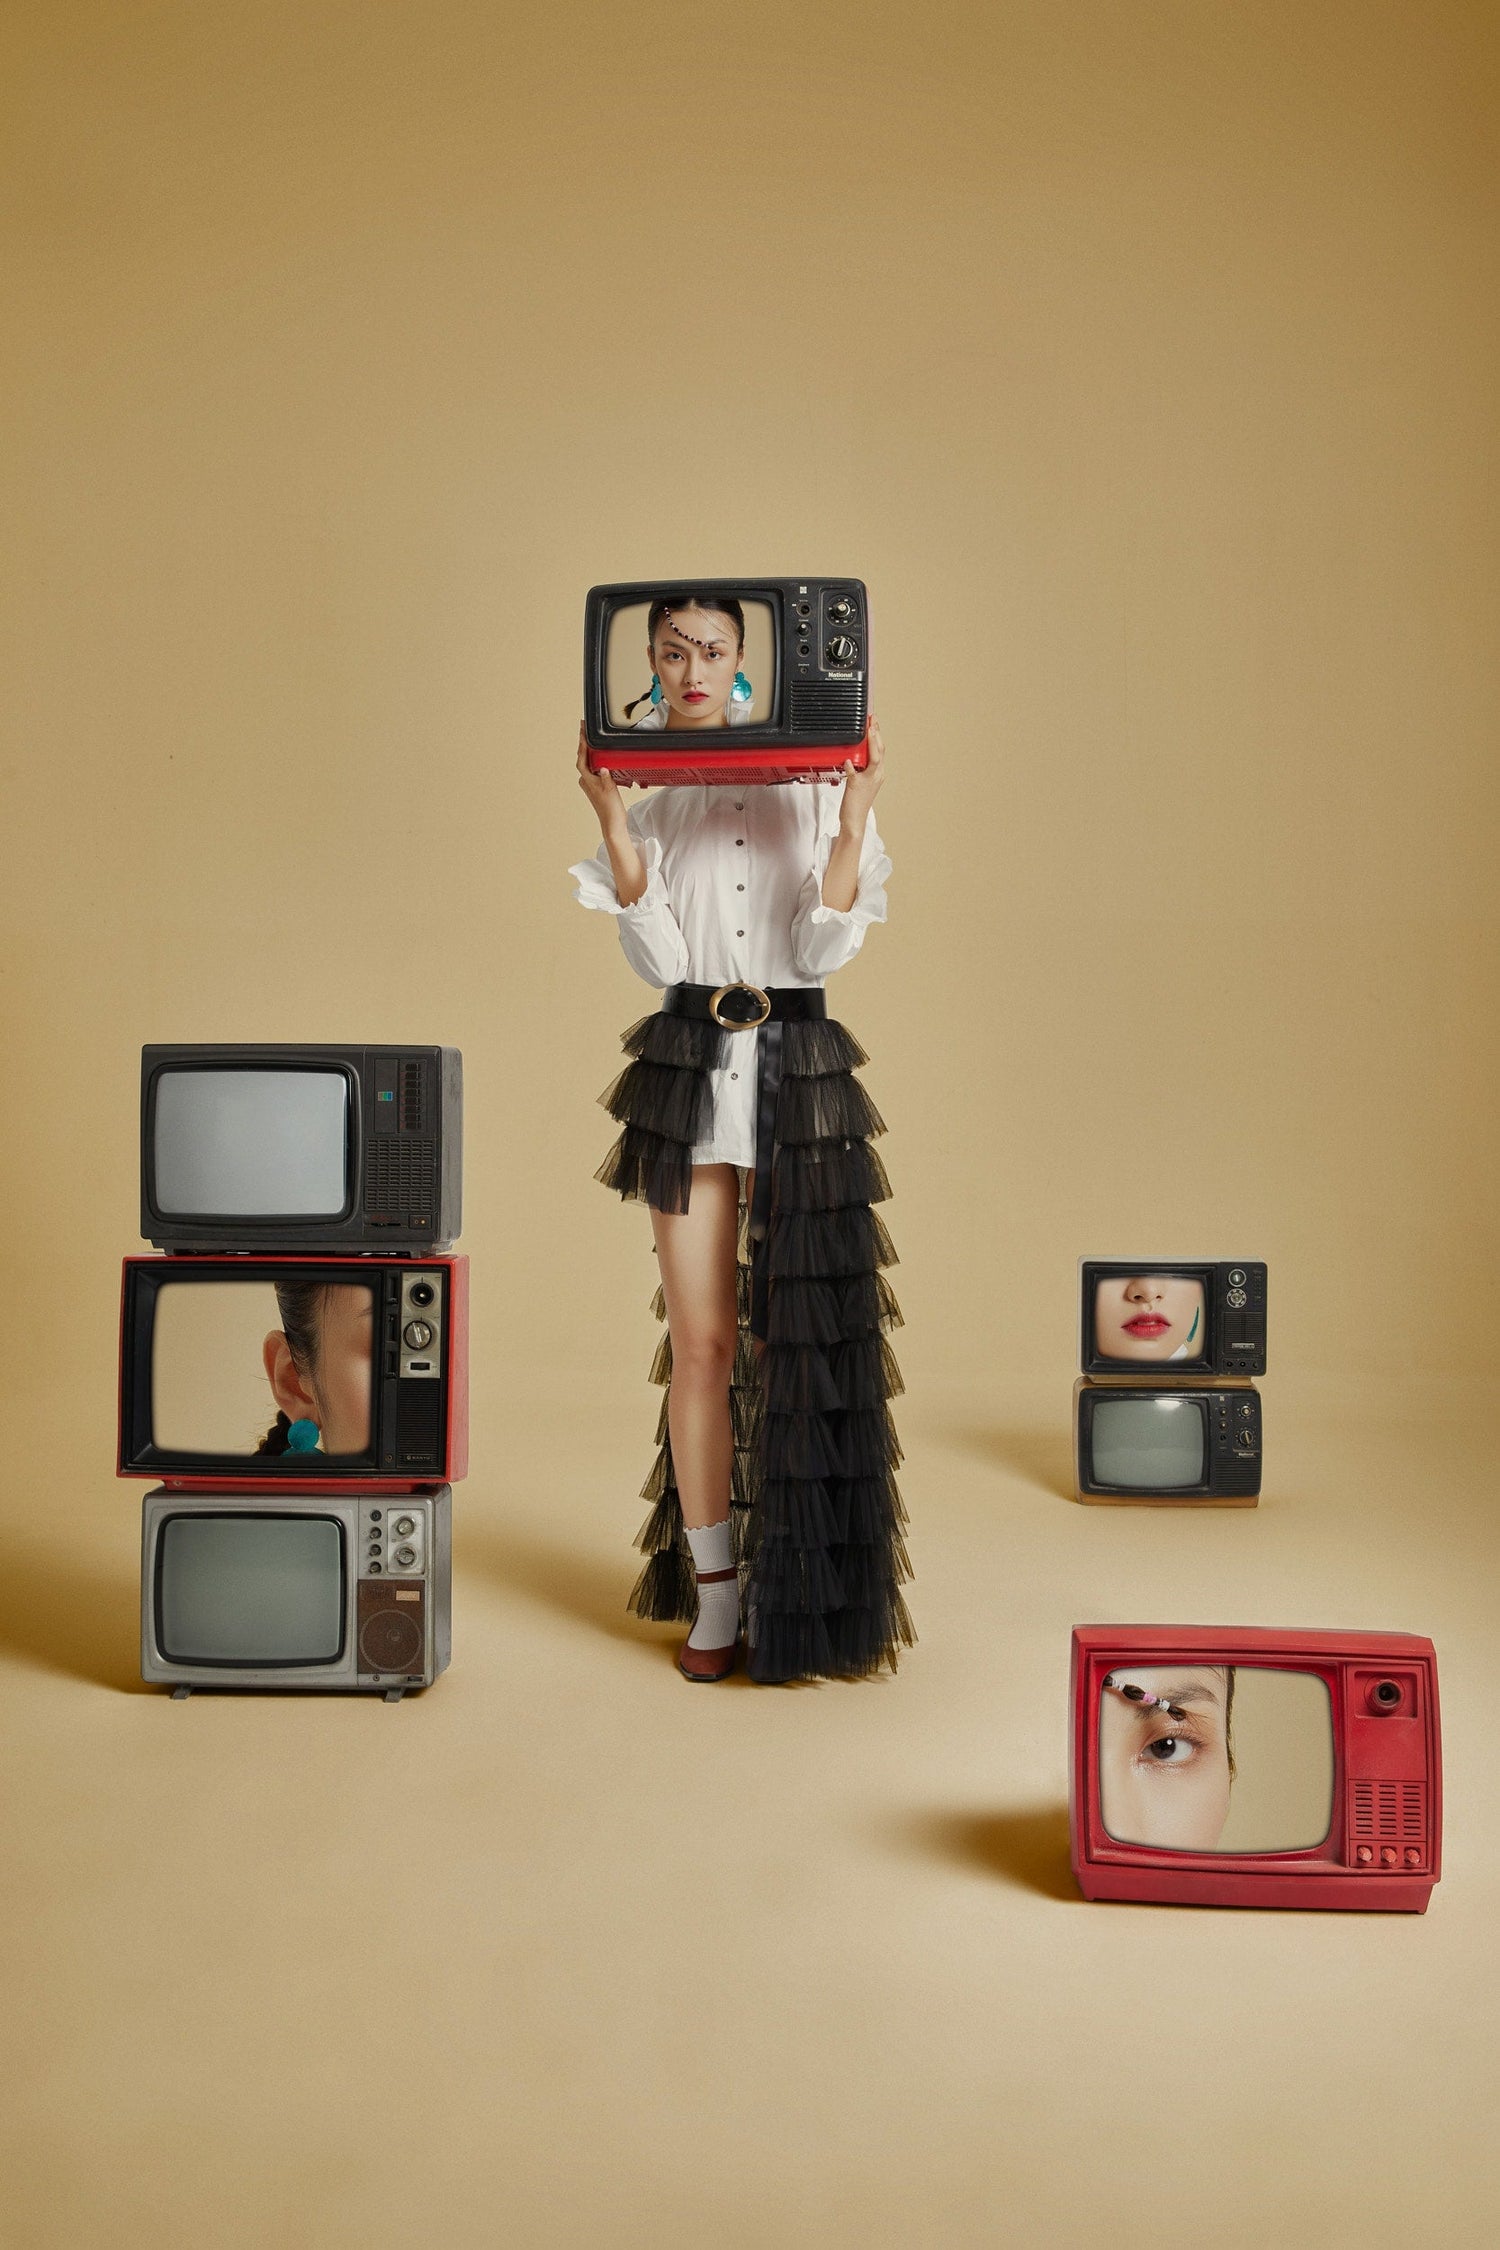 The artpiece 'Lost' by Hui Long shows an unreal scene with a woman holding up a tv while surrounded by several television sets. Her face is hidden in reality, while the TVs show ports of a womans face.